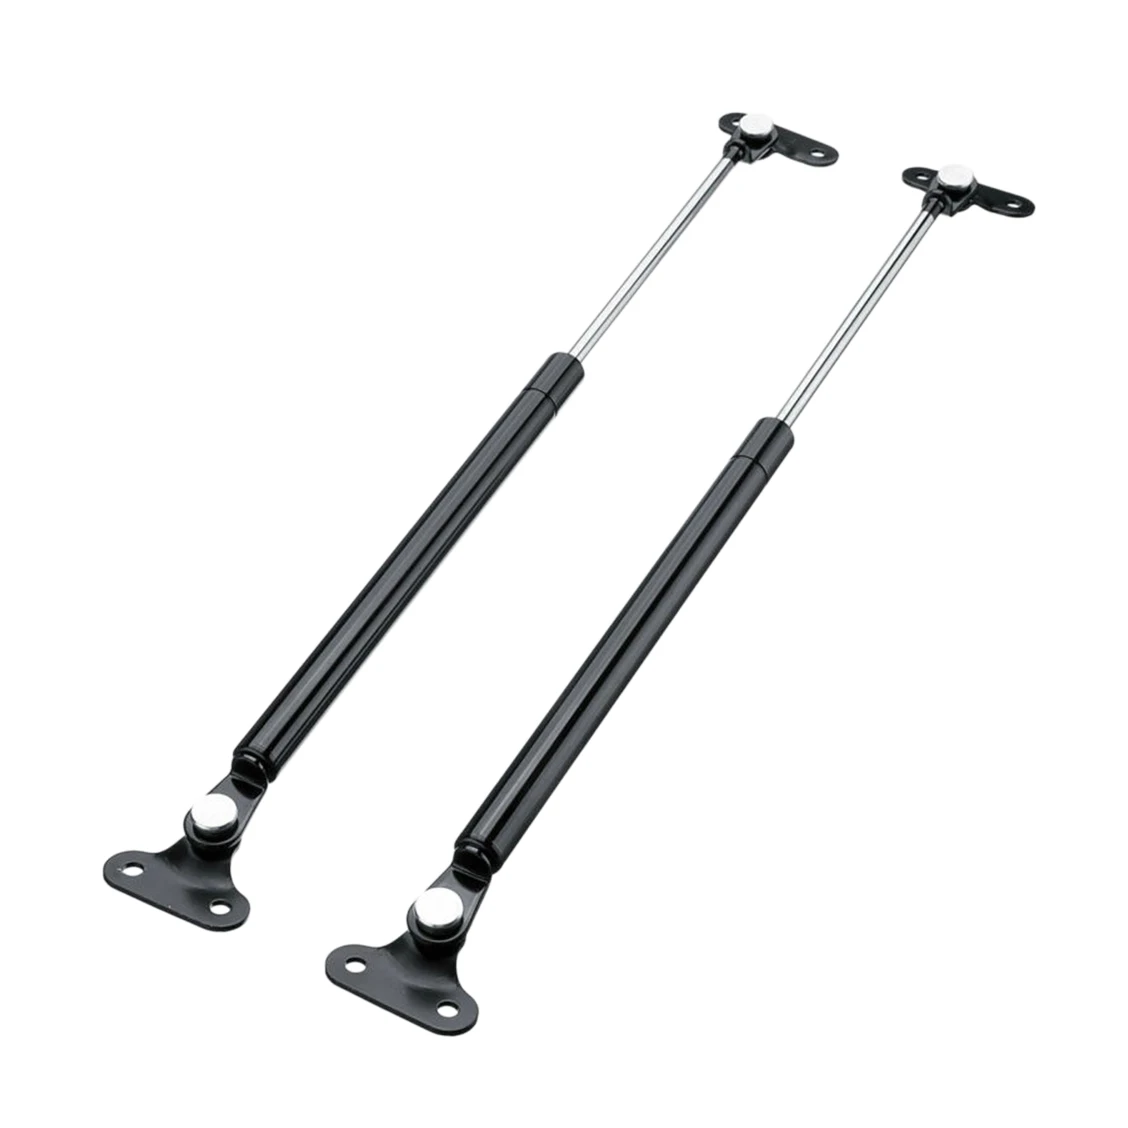 

2Pcs Rear Tailgate Gas Struts Supports 53cm for Toyota Land Cruiser 80 Series 90-97 Gas Struts 68960-60022